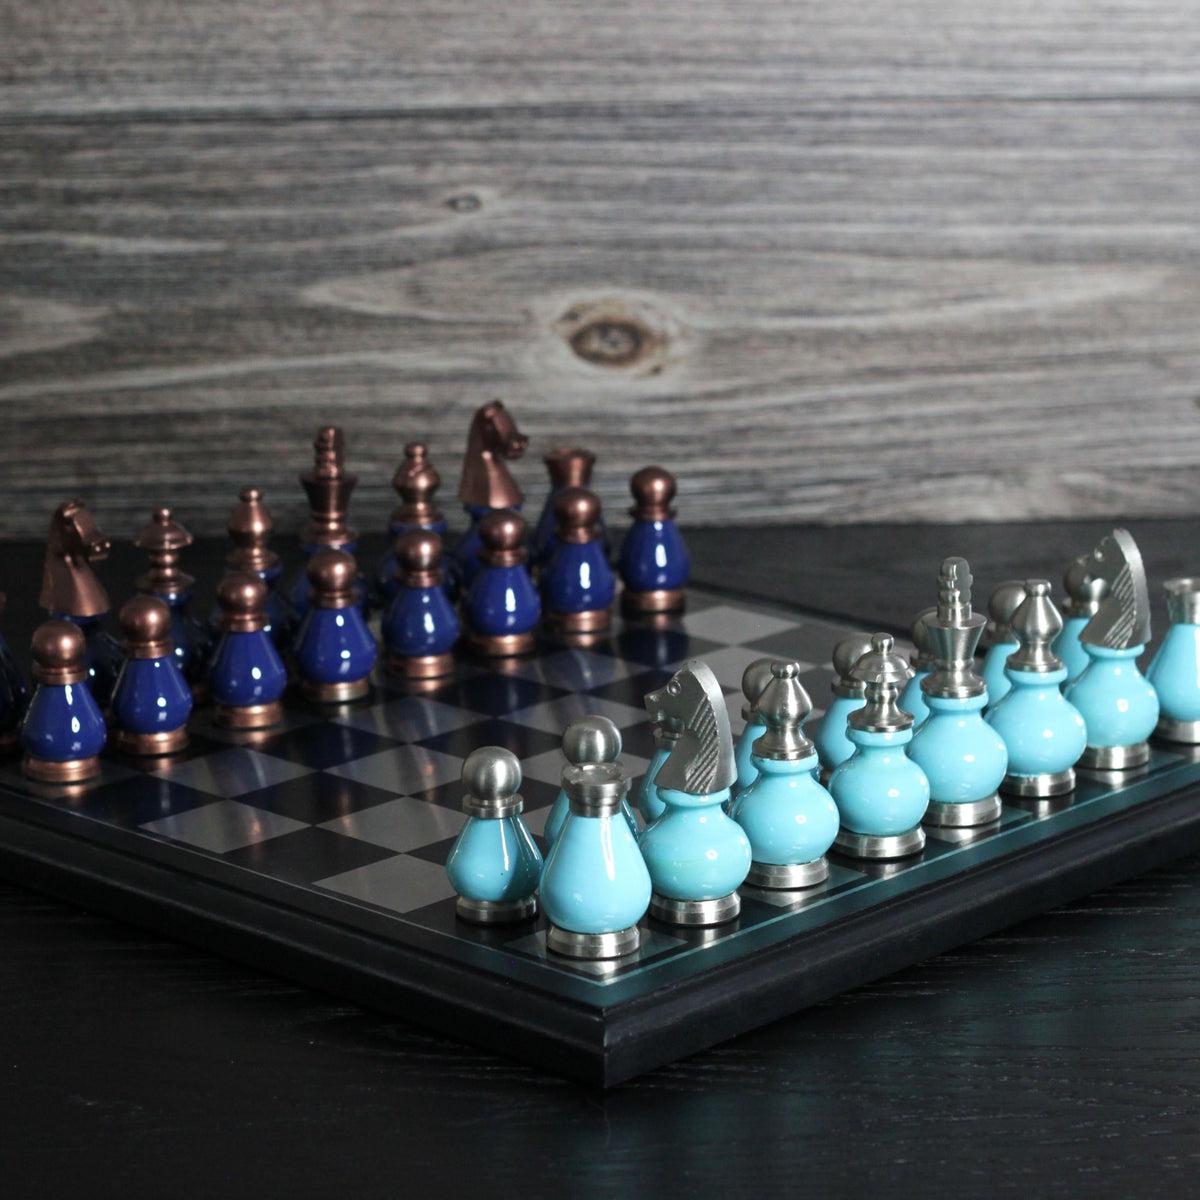 The Queens Gambit - Royal & Tiffany Blue Metallic Chess Set - Marble Cultures